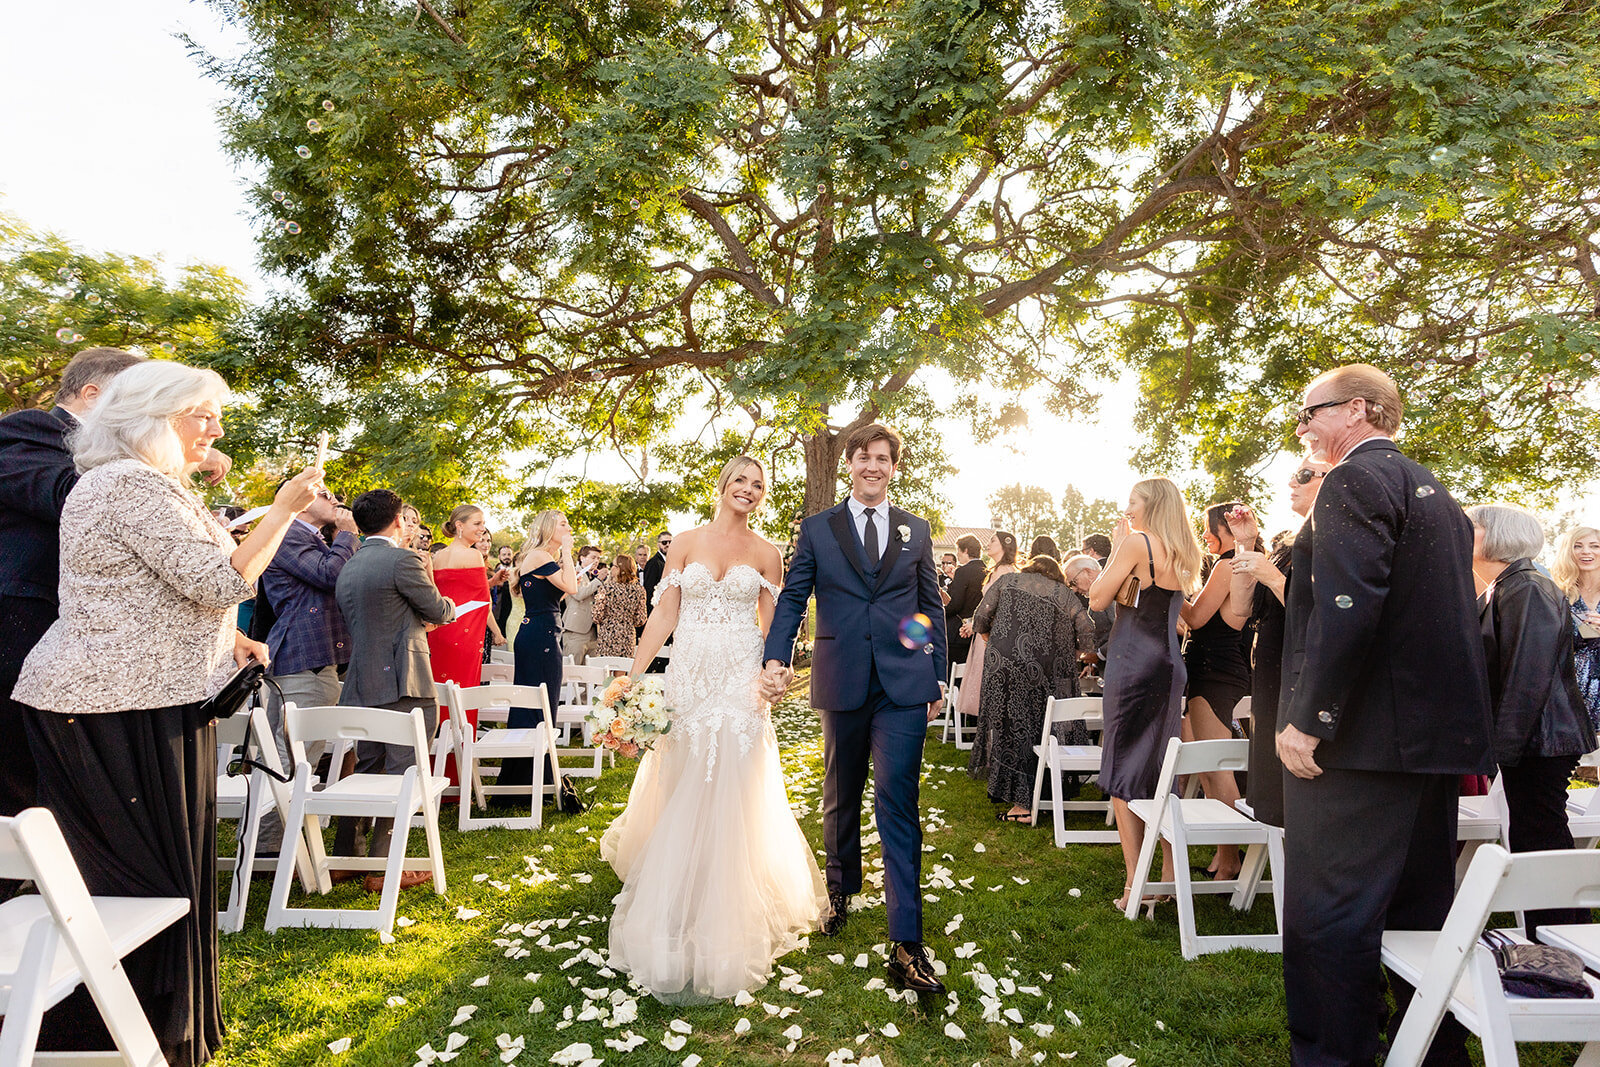 A bride and groom holding hands walking back down the aisle after getting married with their guests standing and applauding at The Inn at Rancho Sante Fe